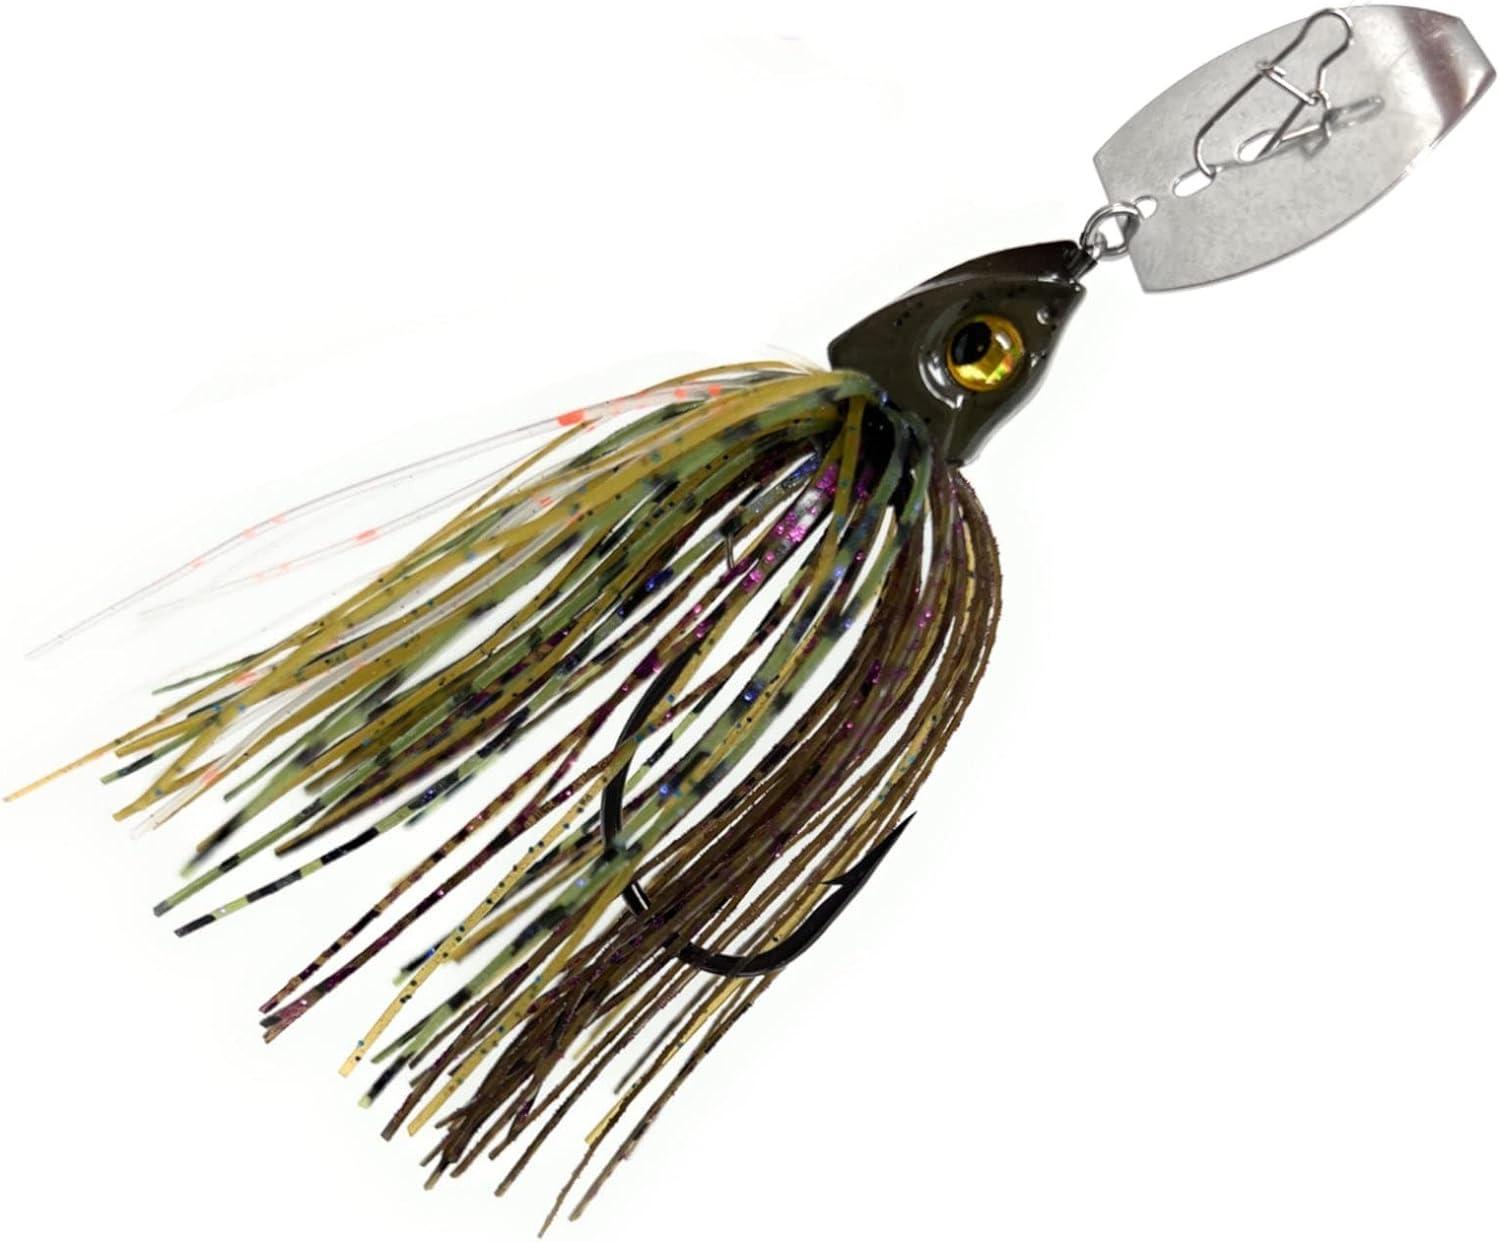 Reaction Tackle Tungsten Bladed Swim Jig Heads for Fishing - 2 Pack of  Fishing Jigs for Large